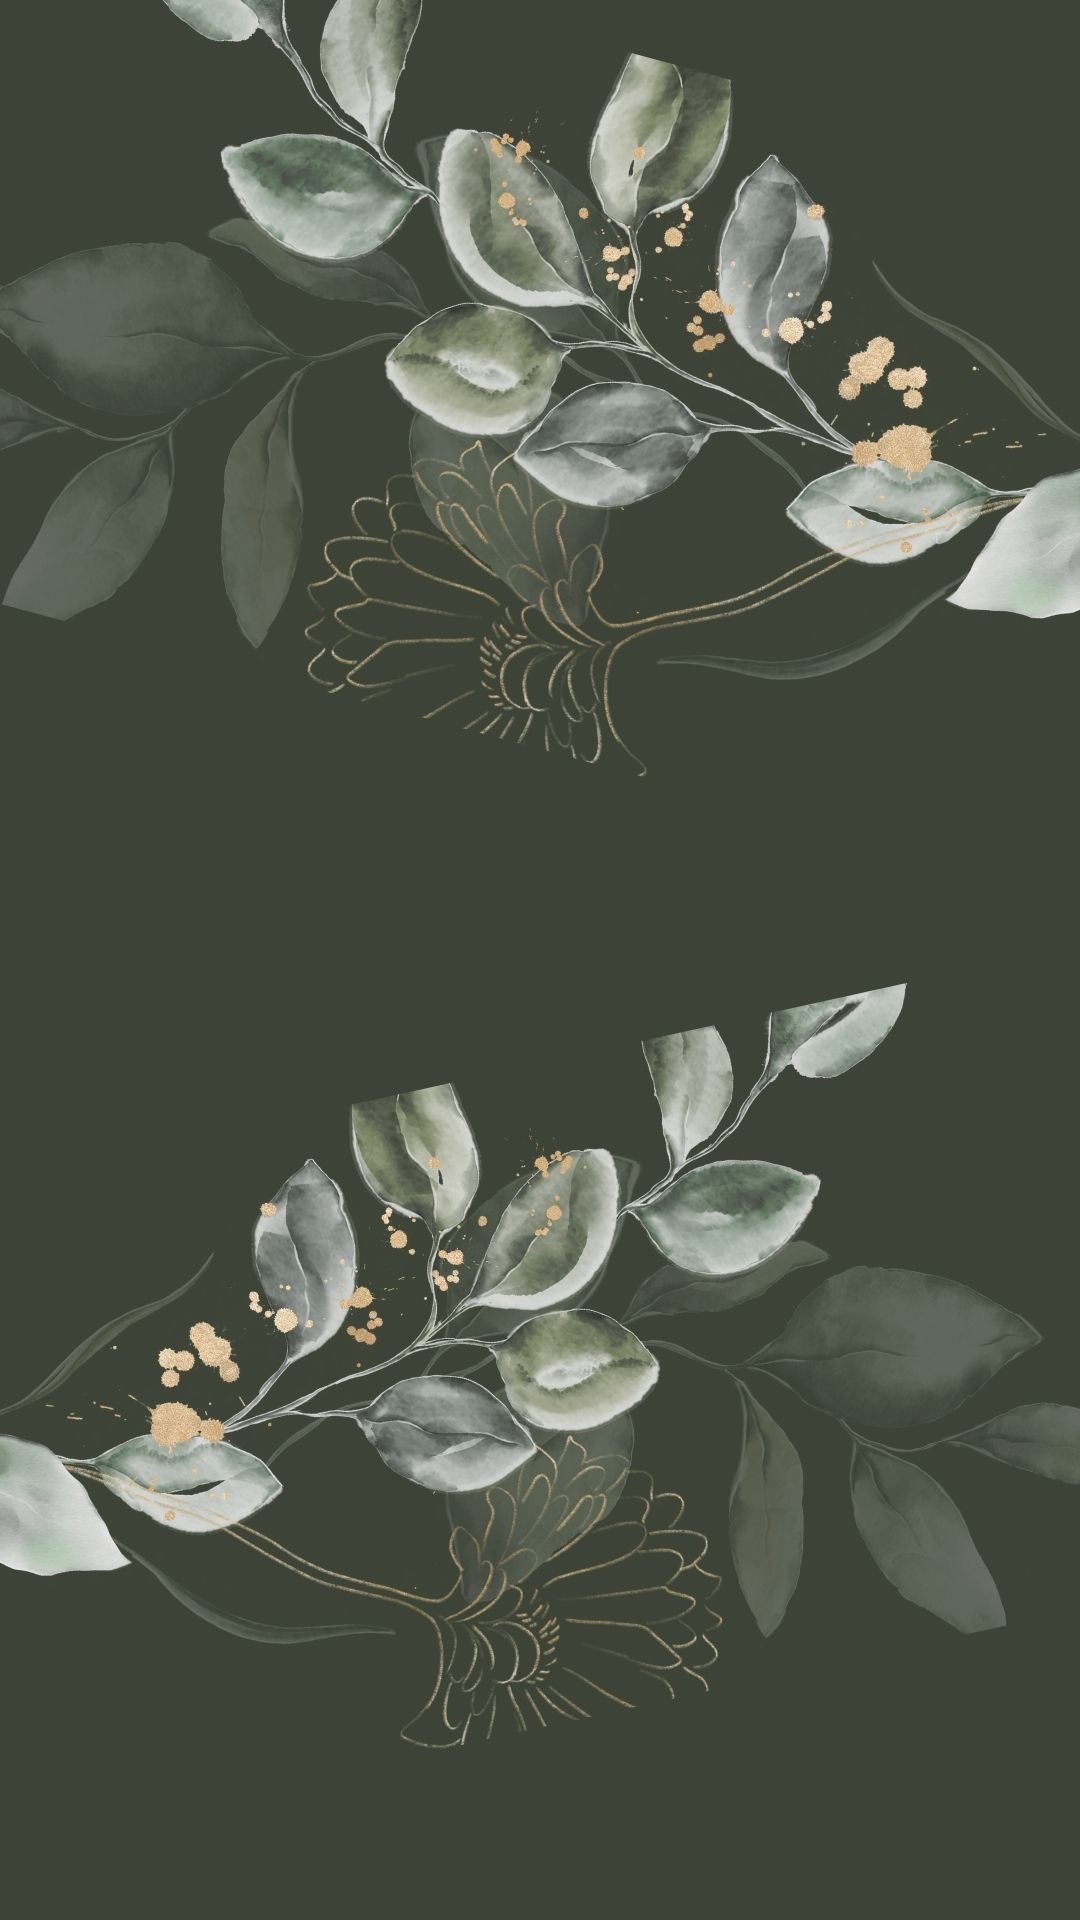 IPhone wallpaper with watercolor greenery and gold details - Dark green